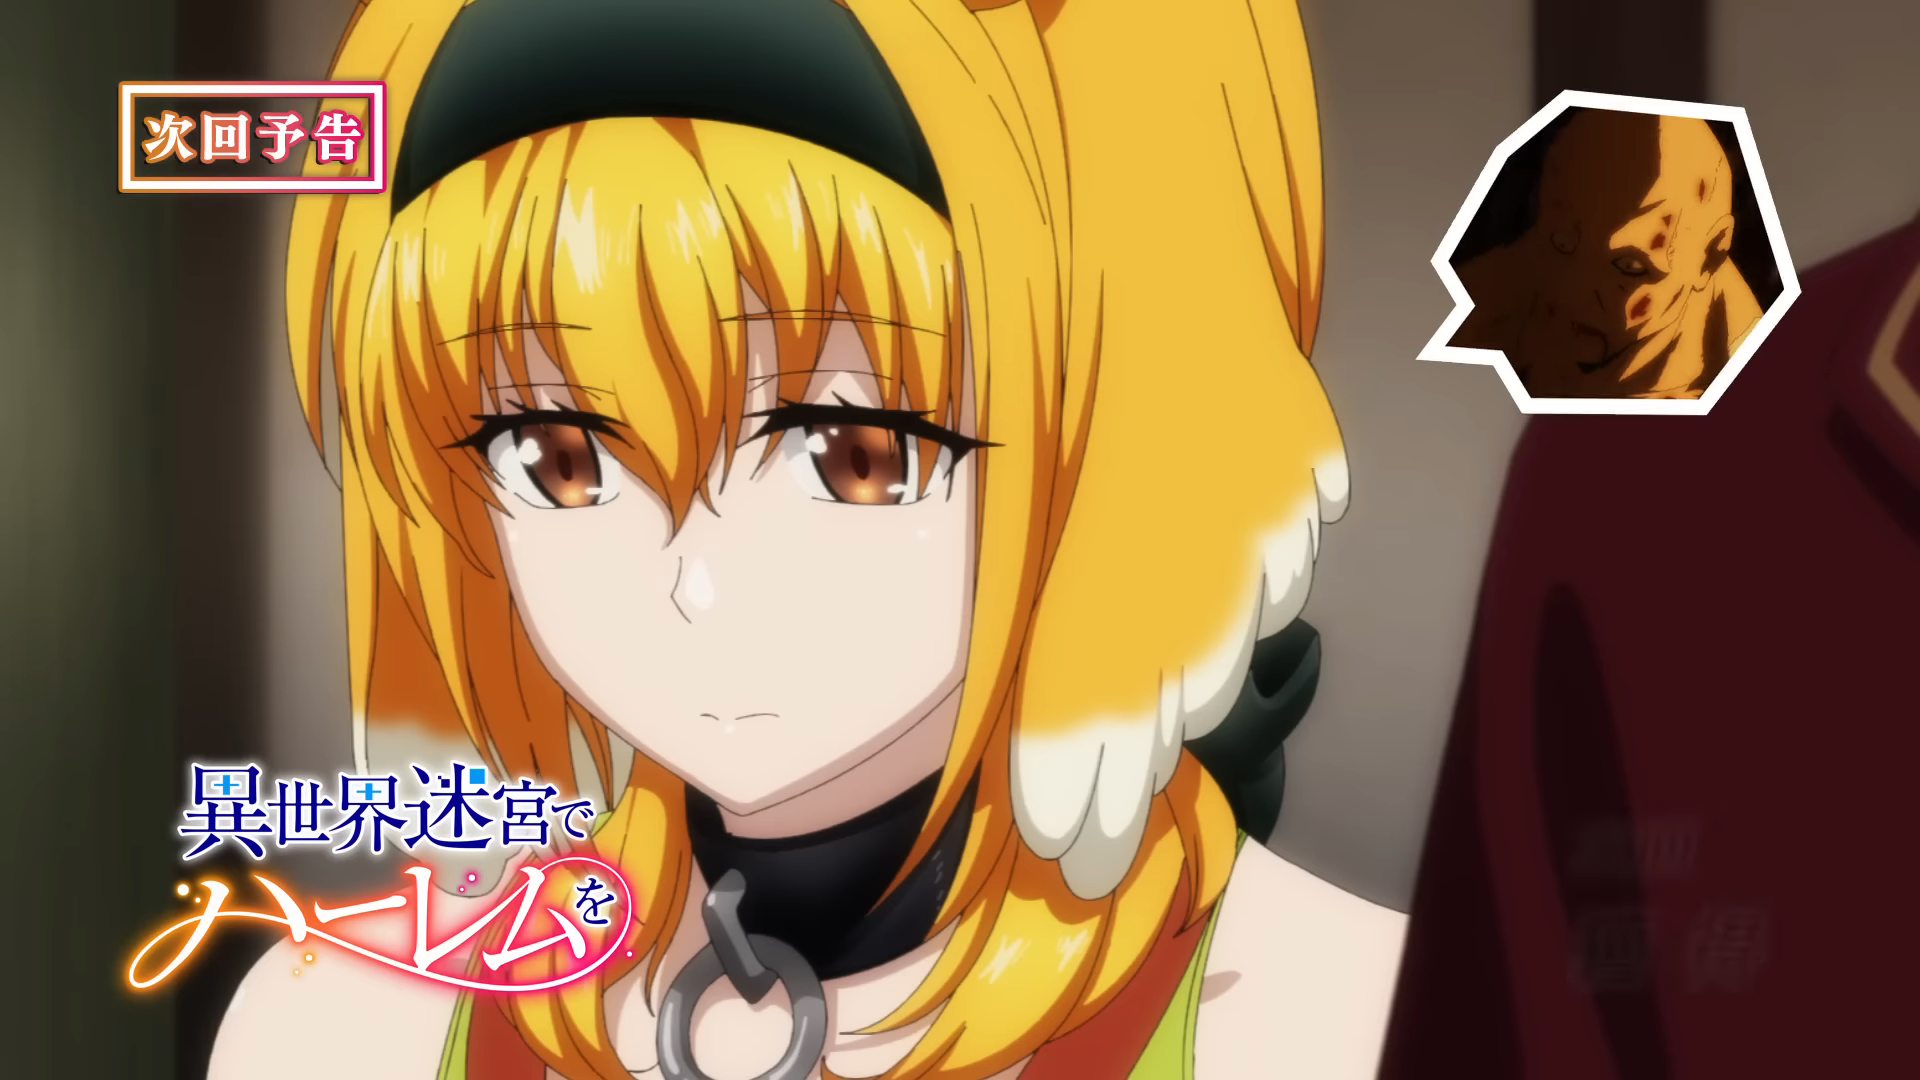 Harem in the Labyrinth of Another World Episode 3 - Release Date & Time 